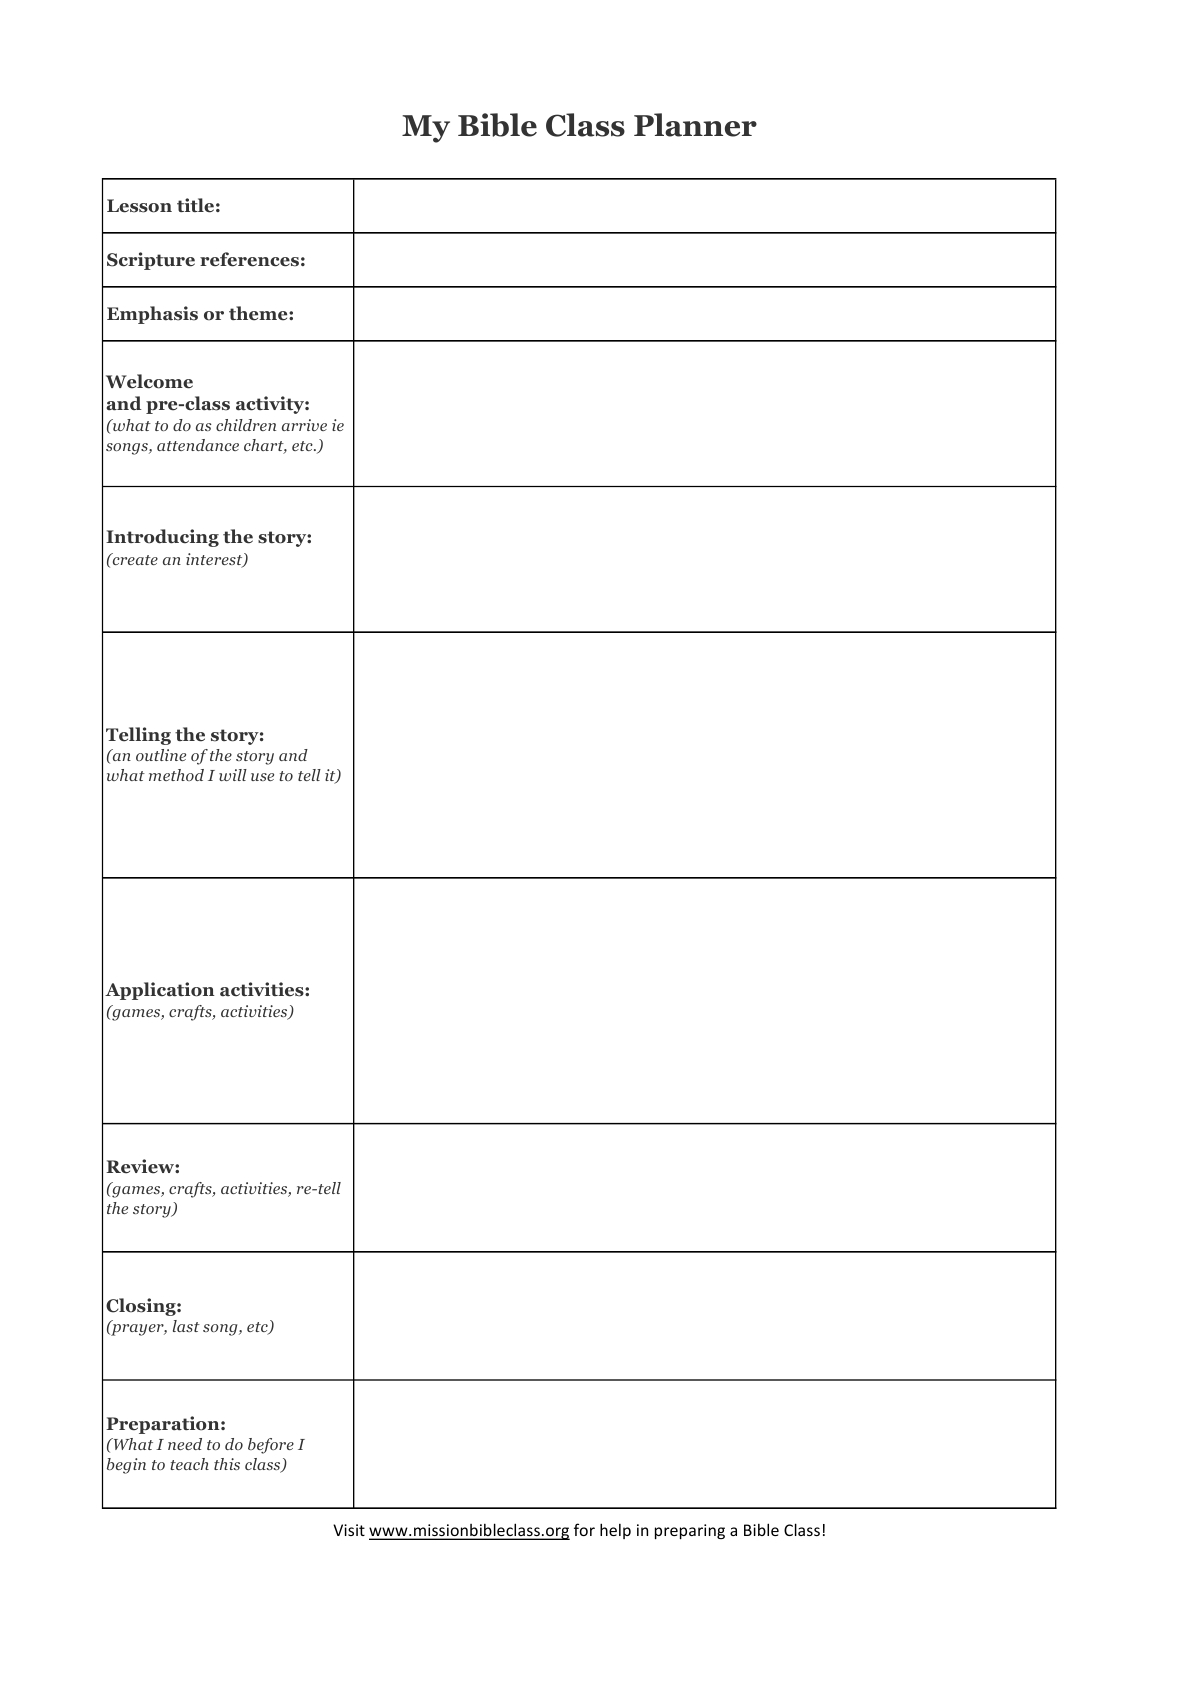 Blank Lesson Plan Templates To Print Mission Bible Class Free